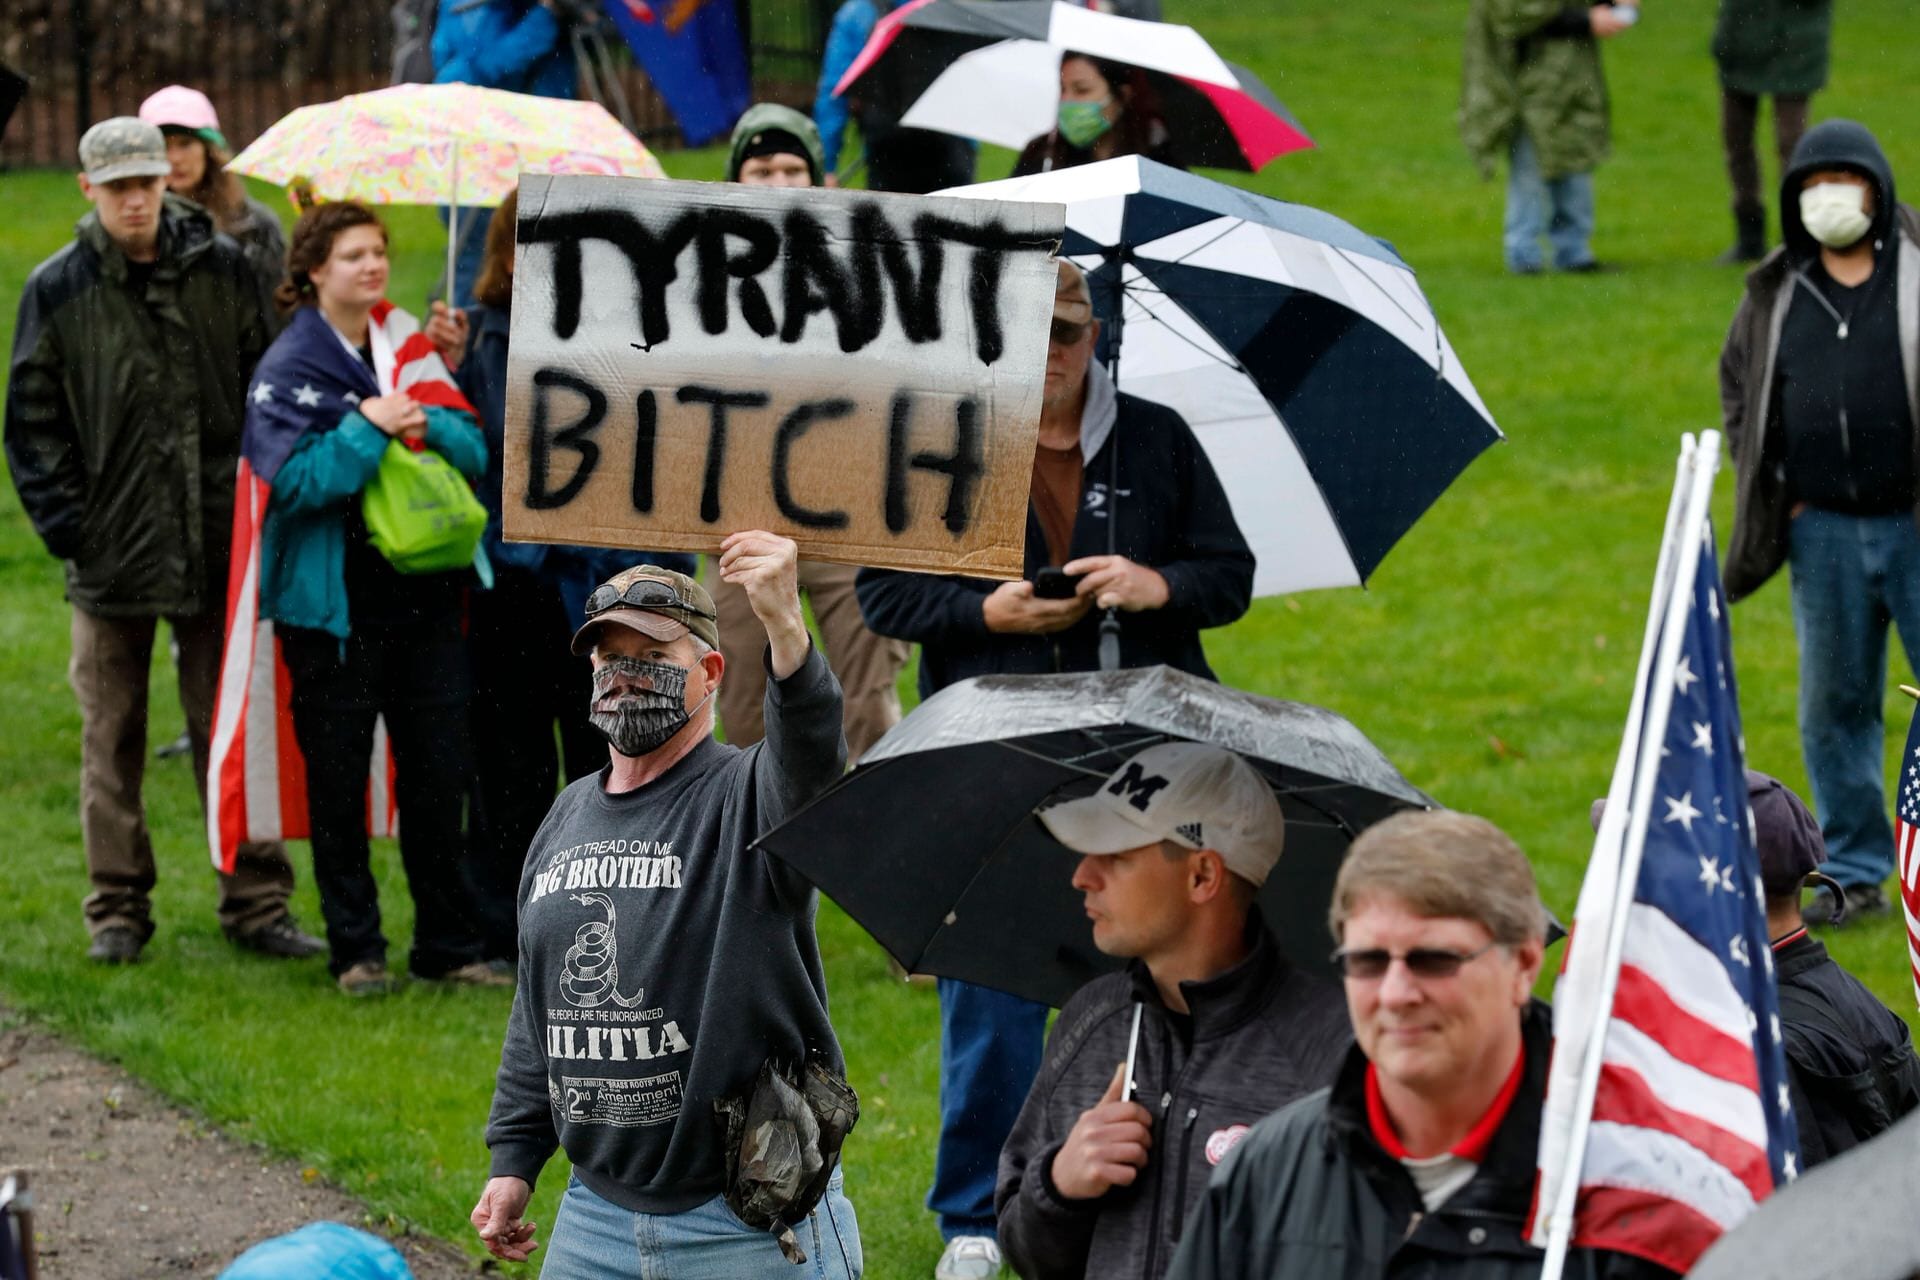 A man holds a sign with "tyrant bitch" written on it.